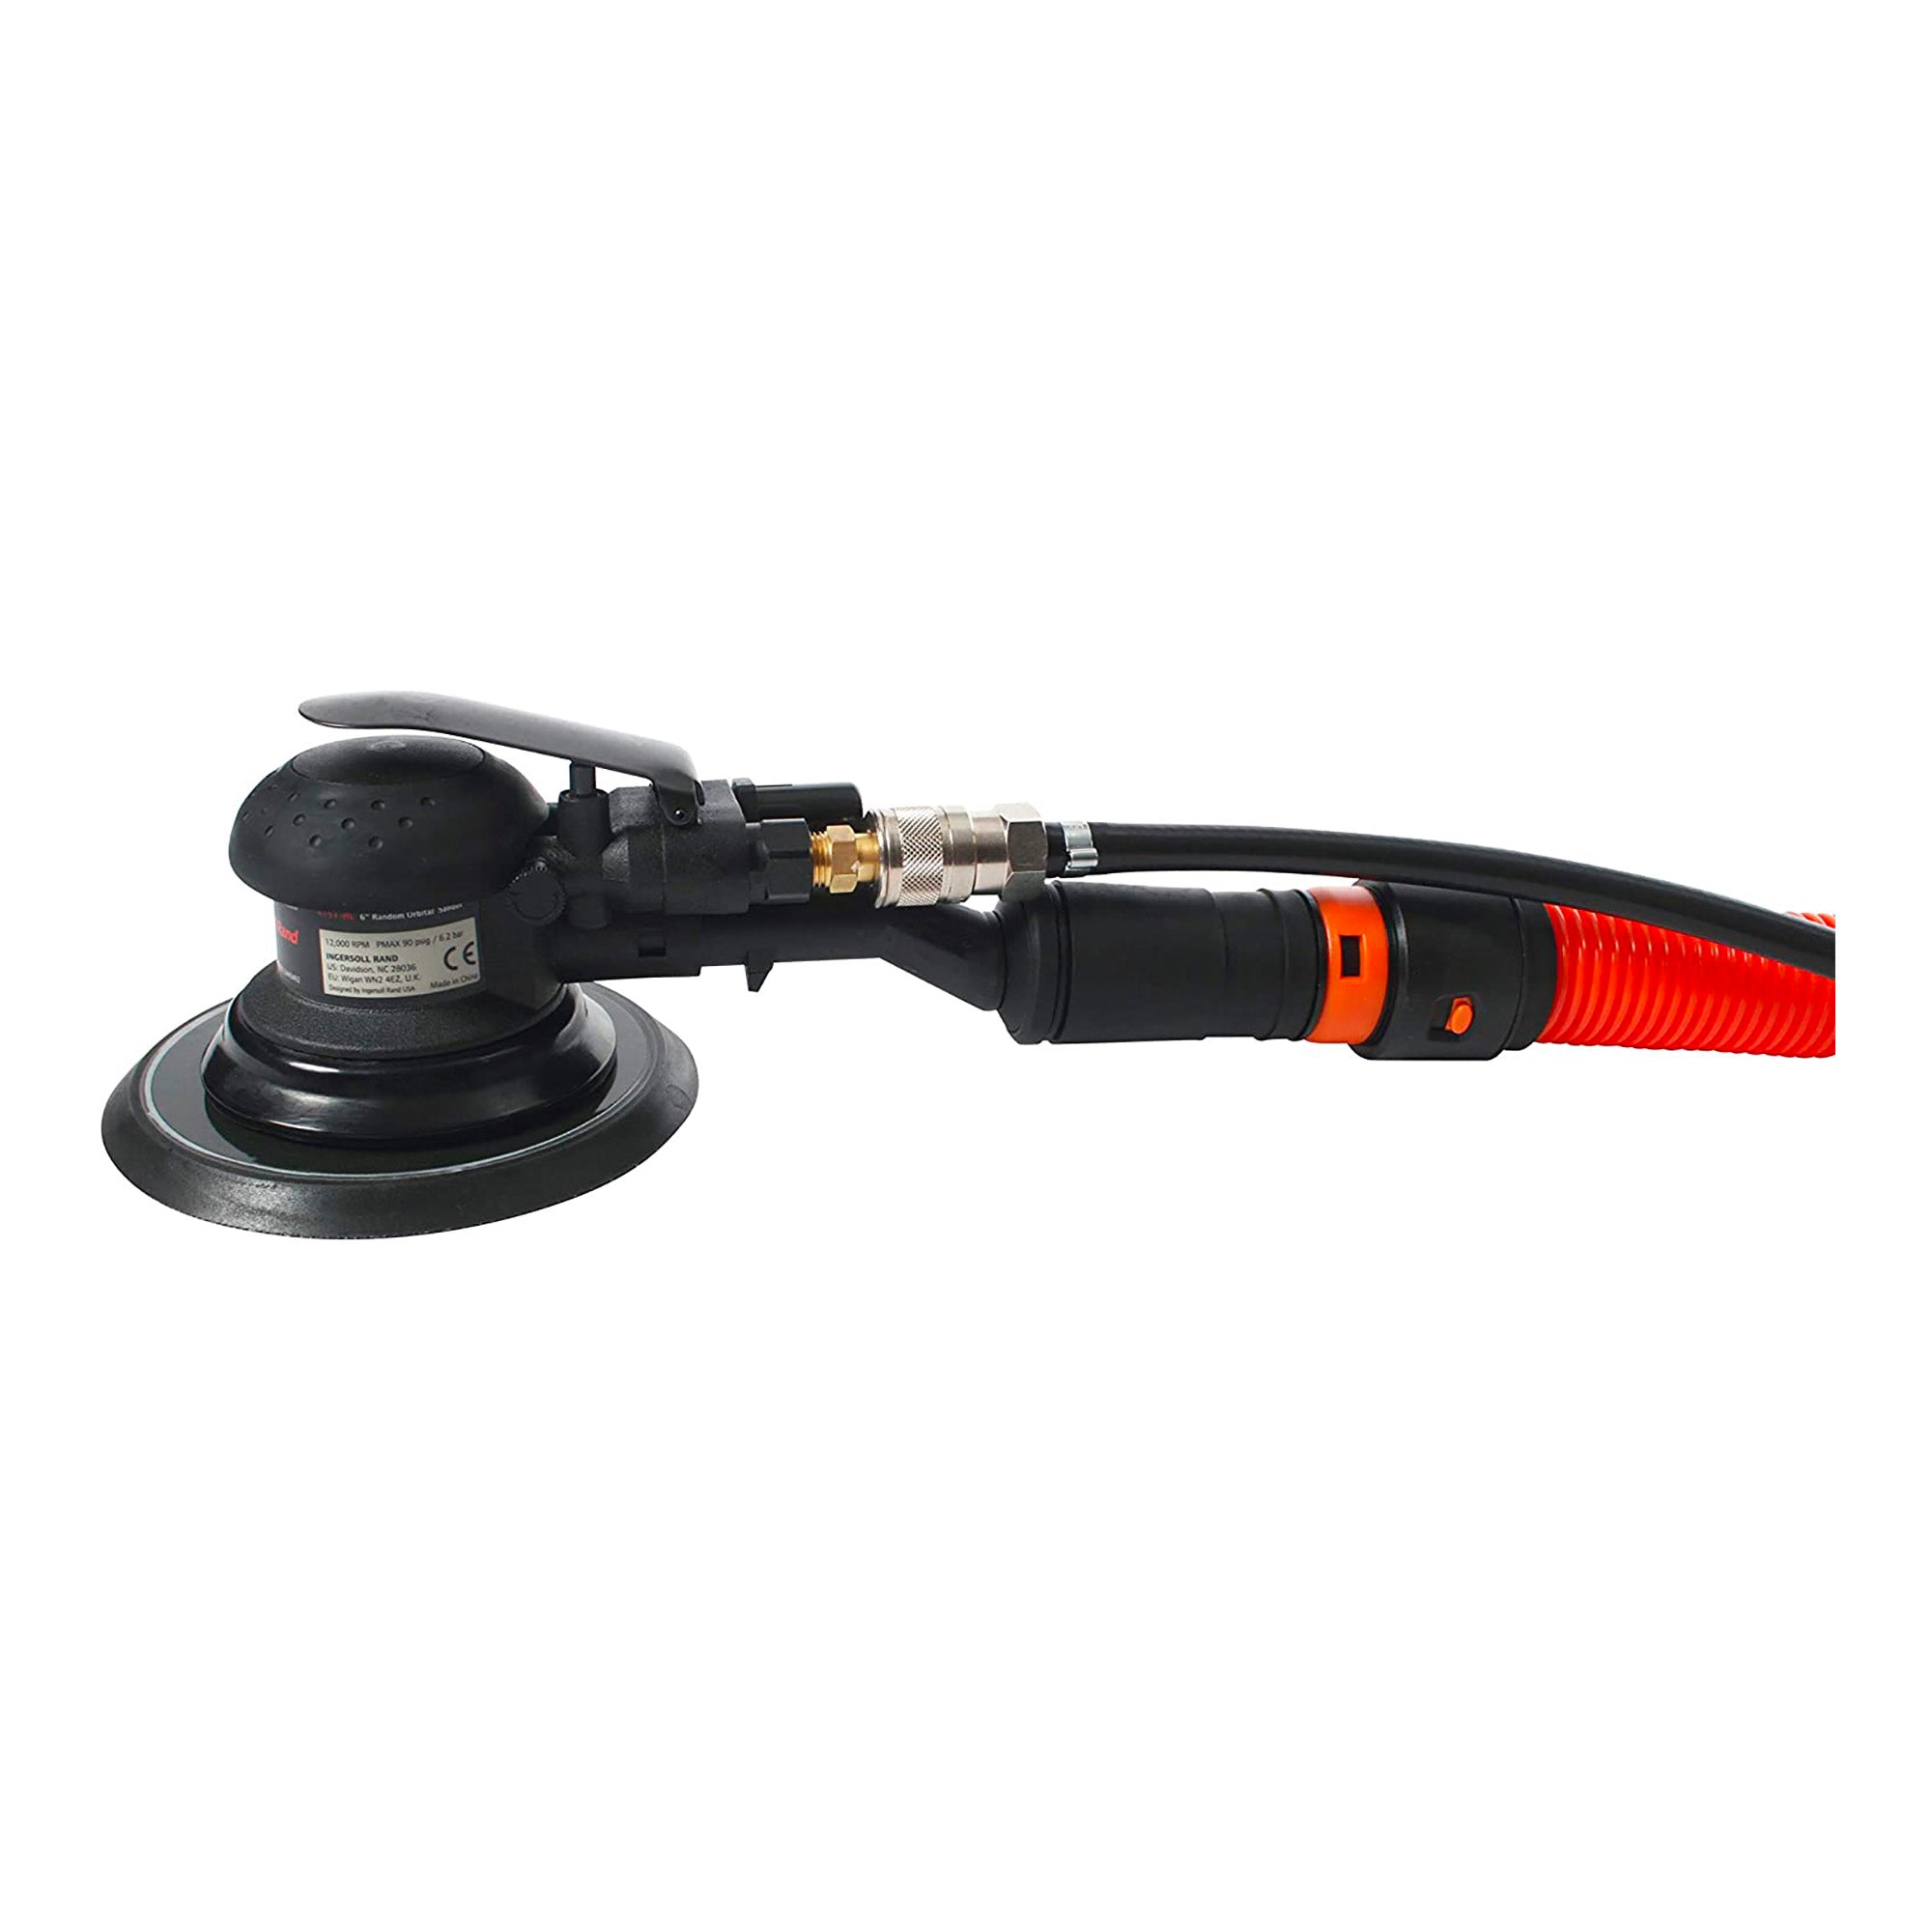 Dust Collection Hoses for Shop Vacuums - Tool Attachment